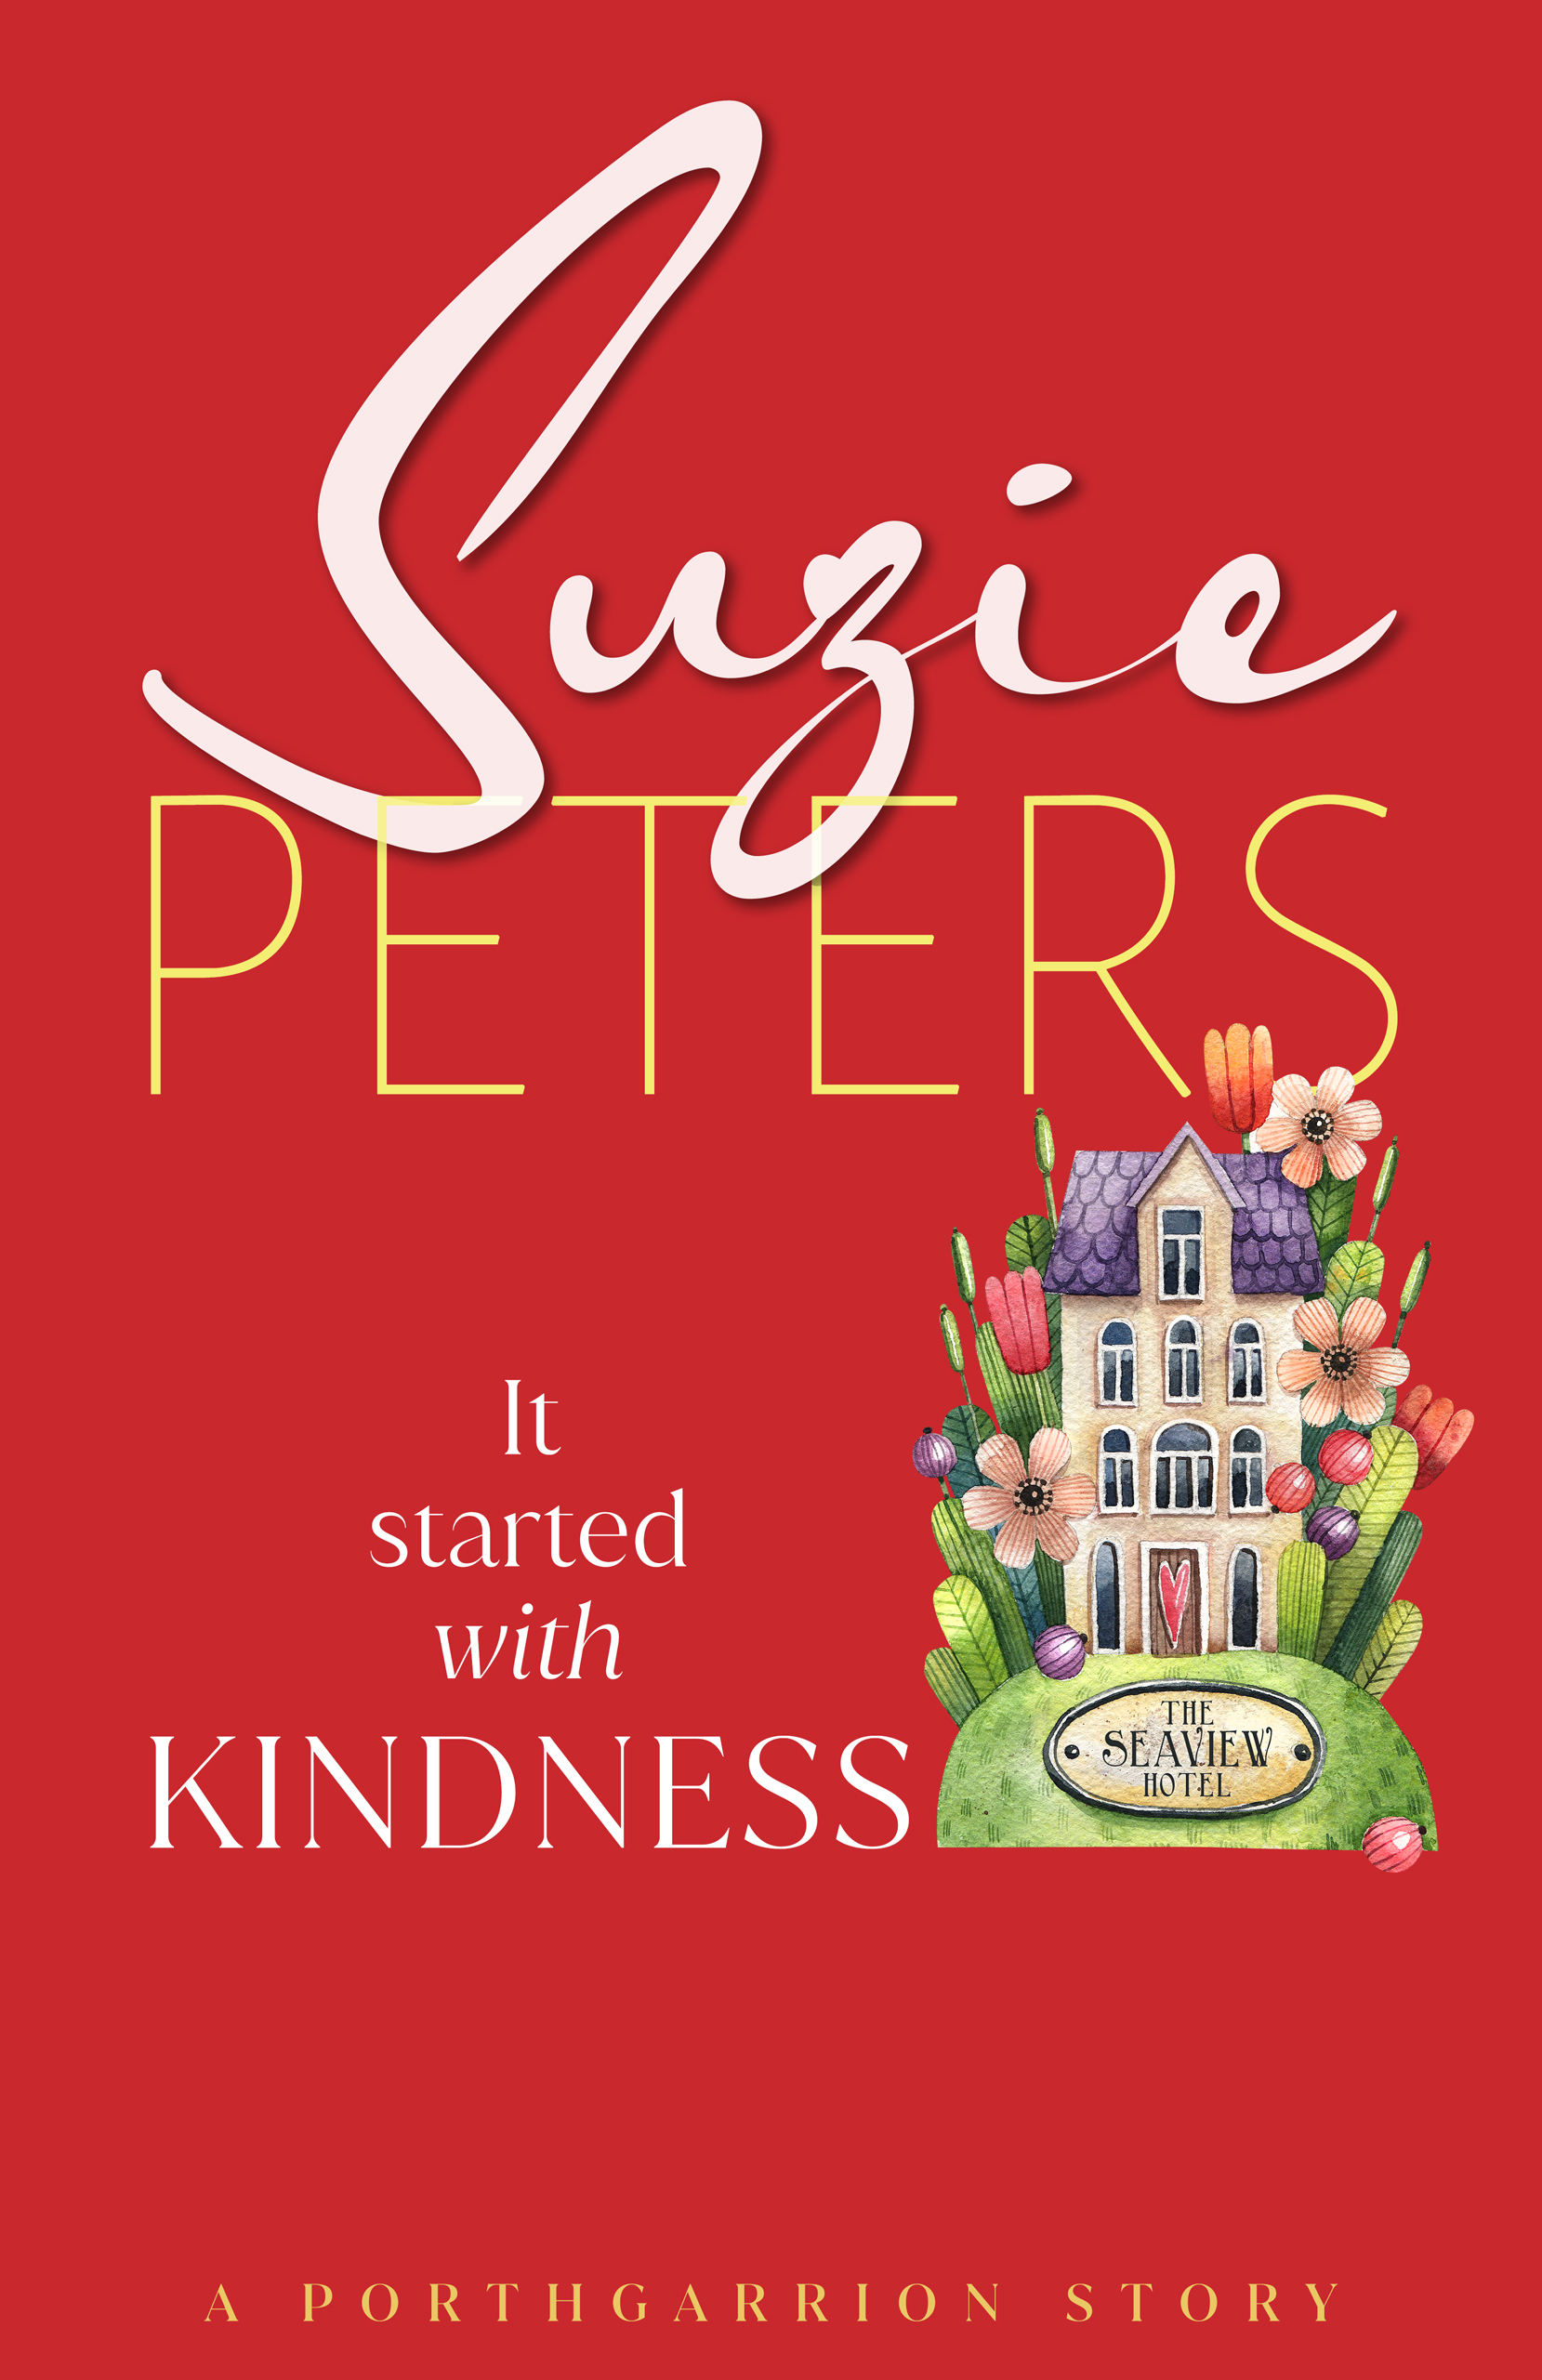 Porthgarrion Series: It Started with Kindness by Suzie Peters.